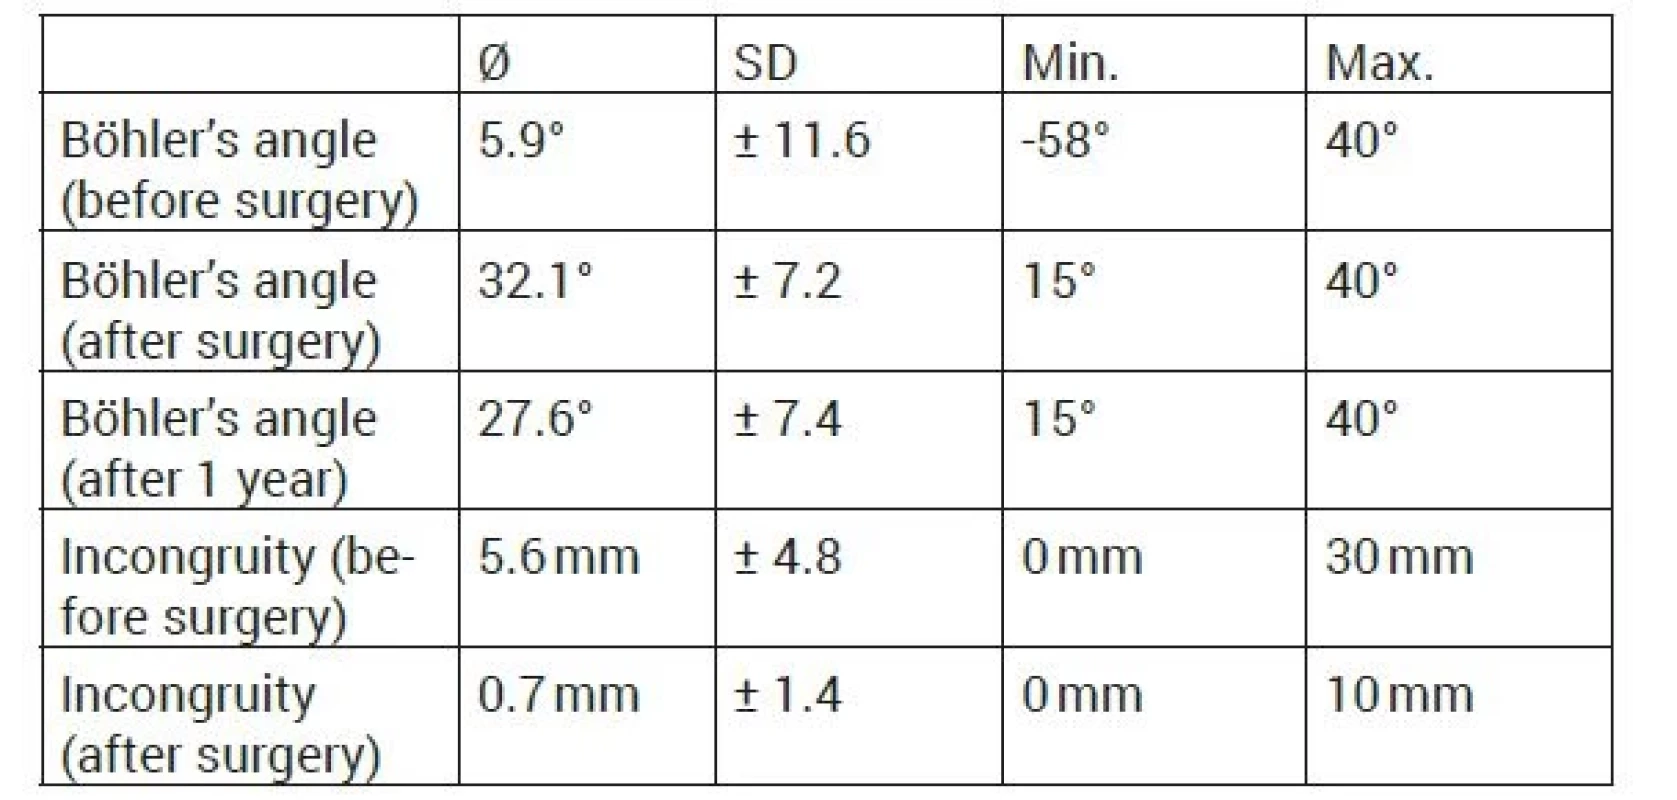 Table of mean measurements in 265 cases of intra-articular
fractures of the calcaneus. Böhler’s angles preoperatively, postoperatively,
and one year postoperatively are recorded. CT images show
mean values and ranges of posterior articular surface incongruity
measurements before and after surgery